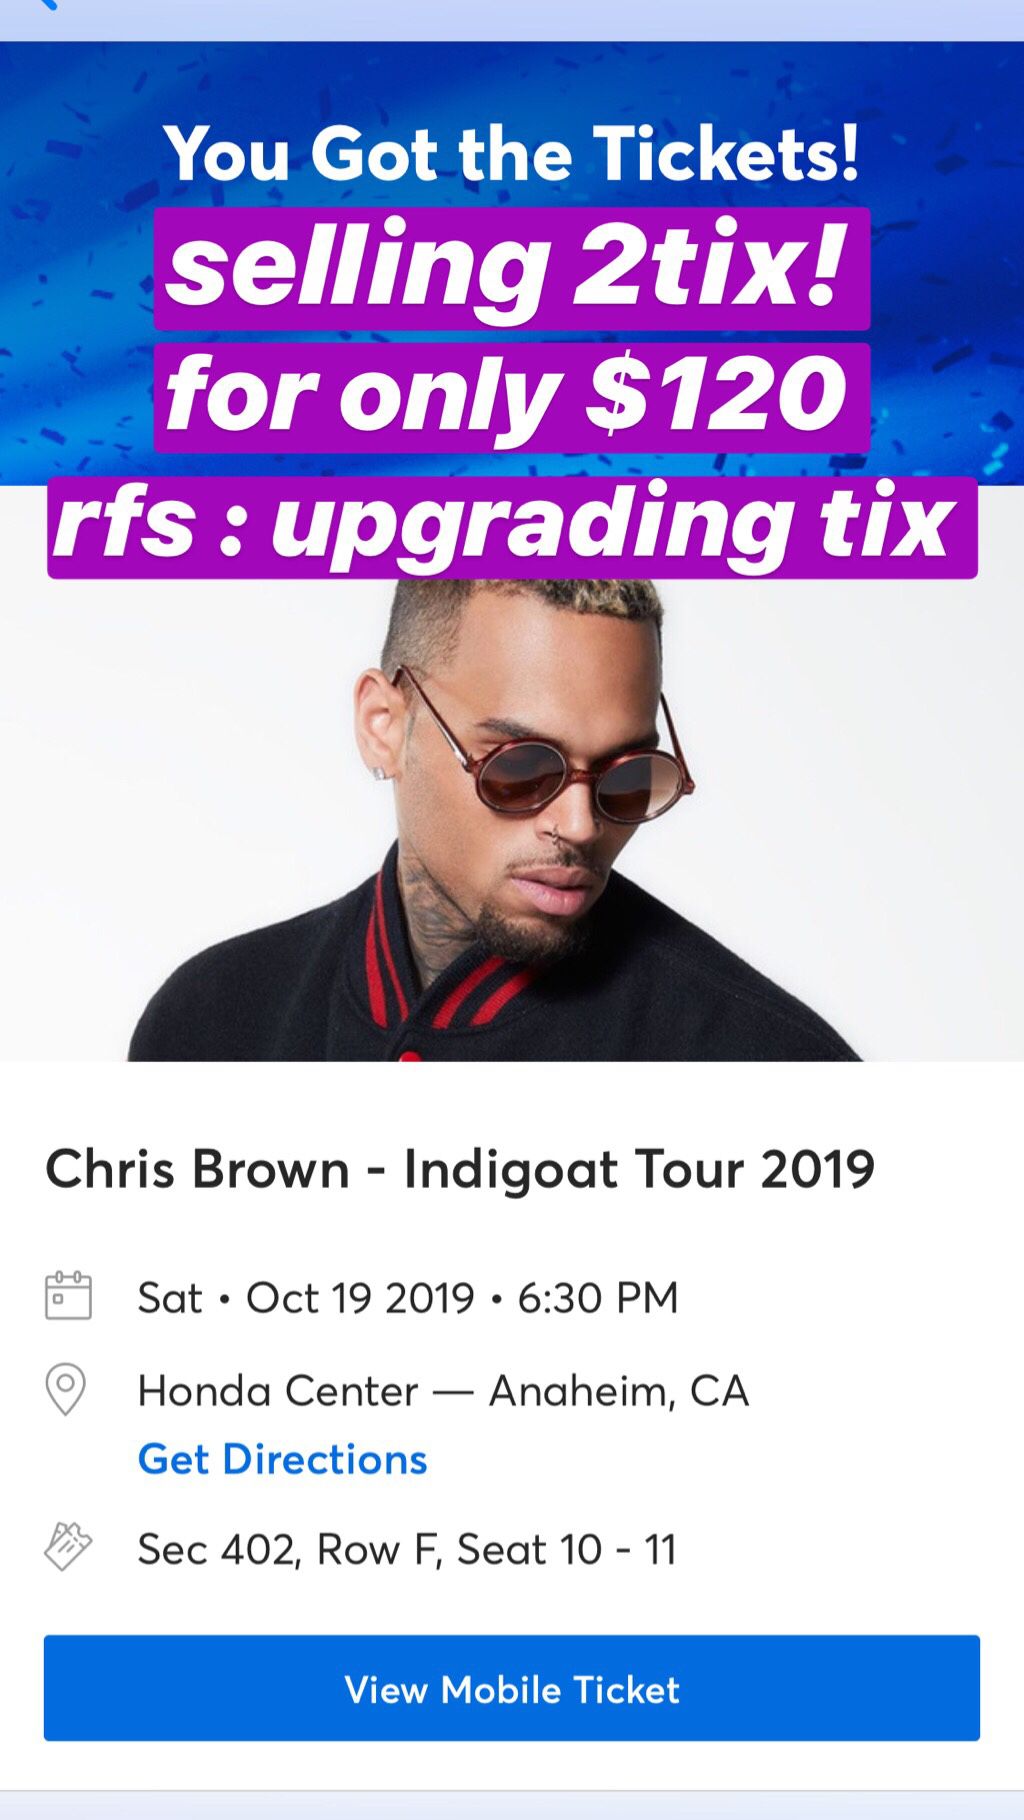 CHRIS BROWN FOR 2 TICKETS 🔥